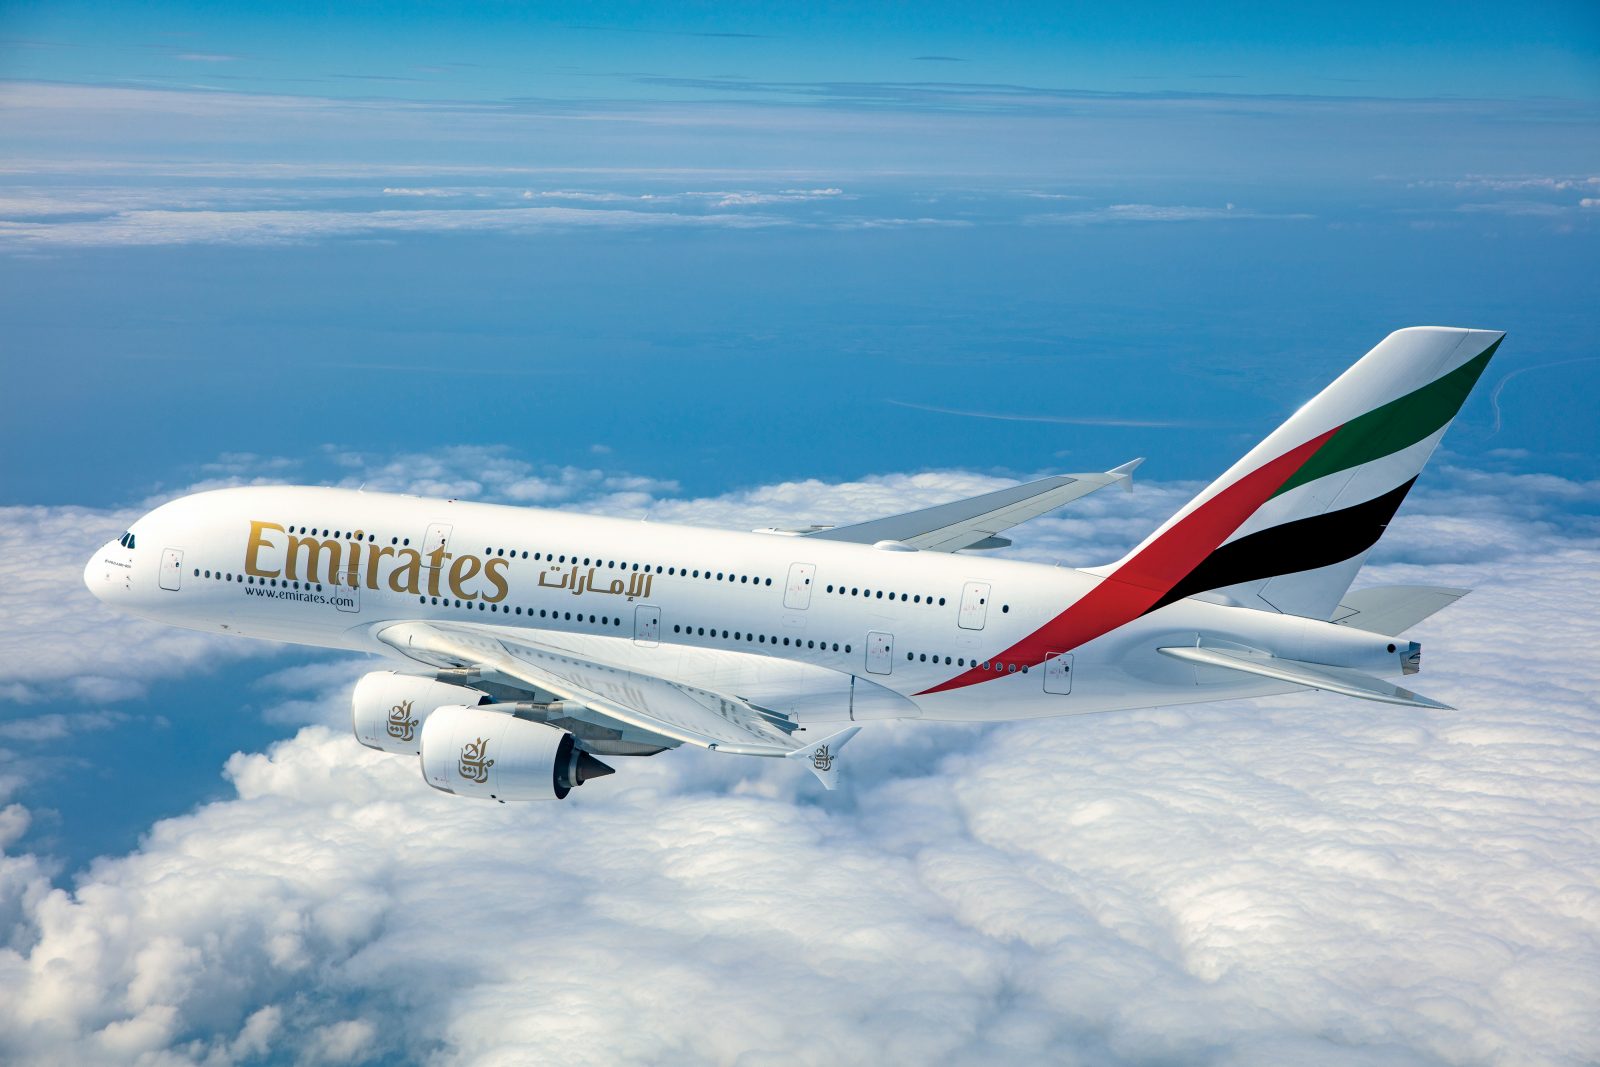 REPORT: Emirates Deal for up to 36 More Airbus A380 Aircraft Hits Turbulence